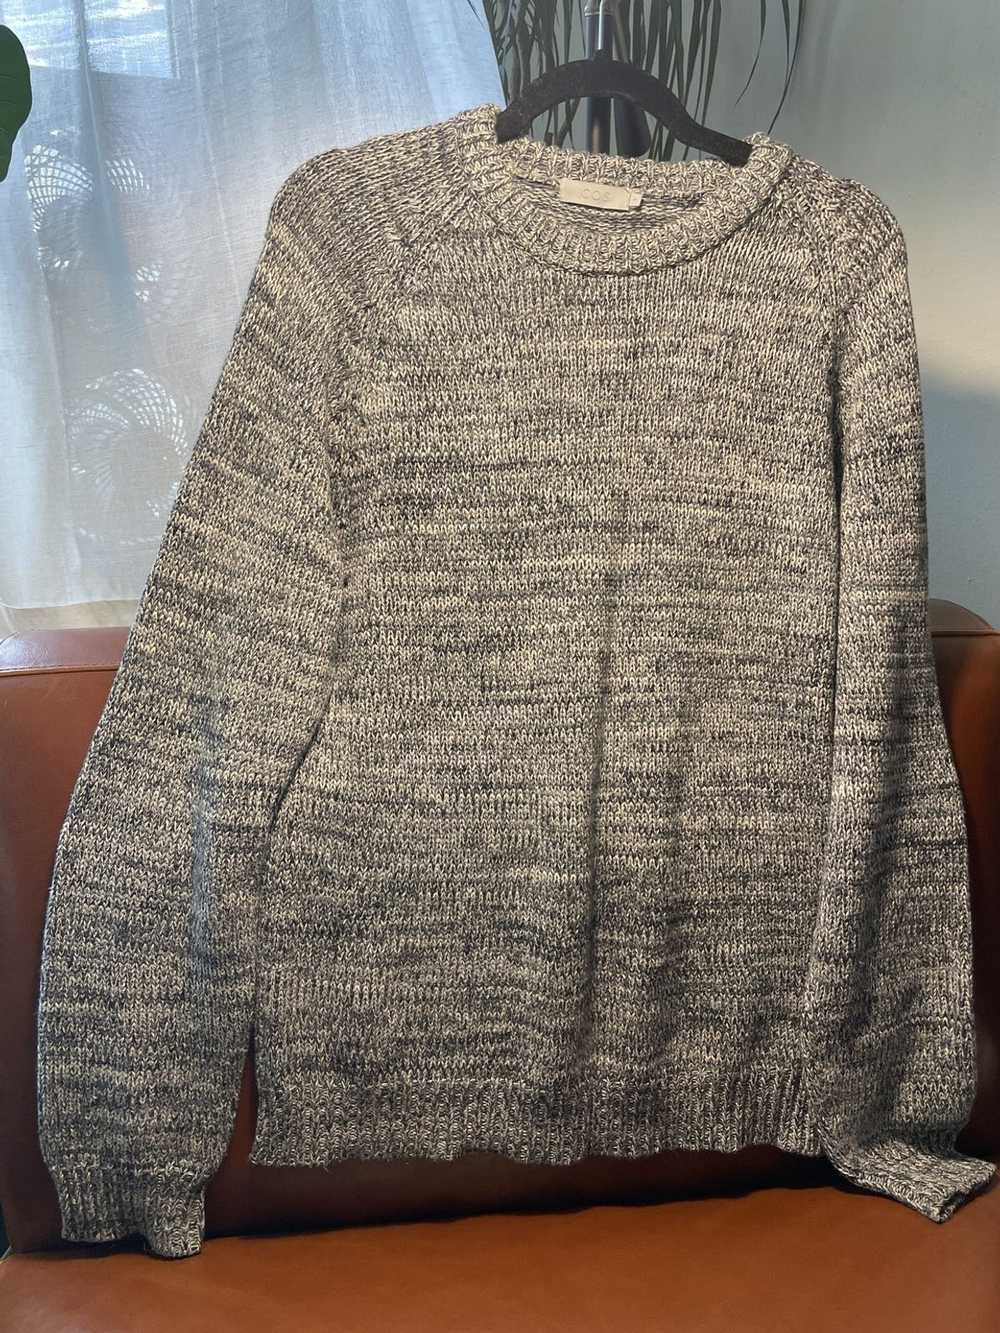 Cos Marled Grey Knit Sweater - image 1